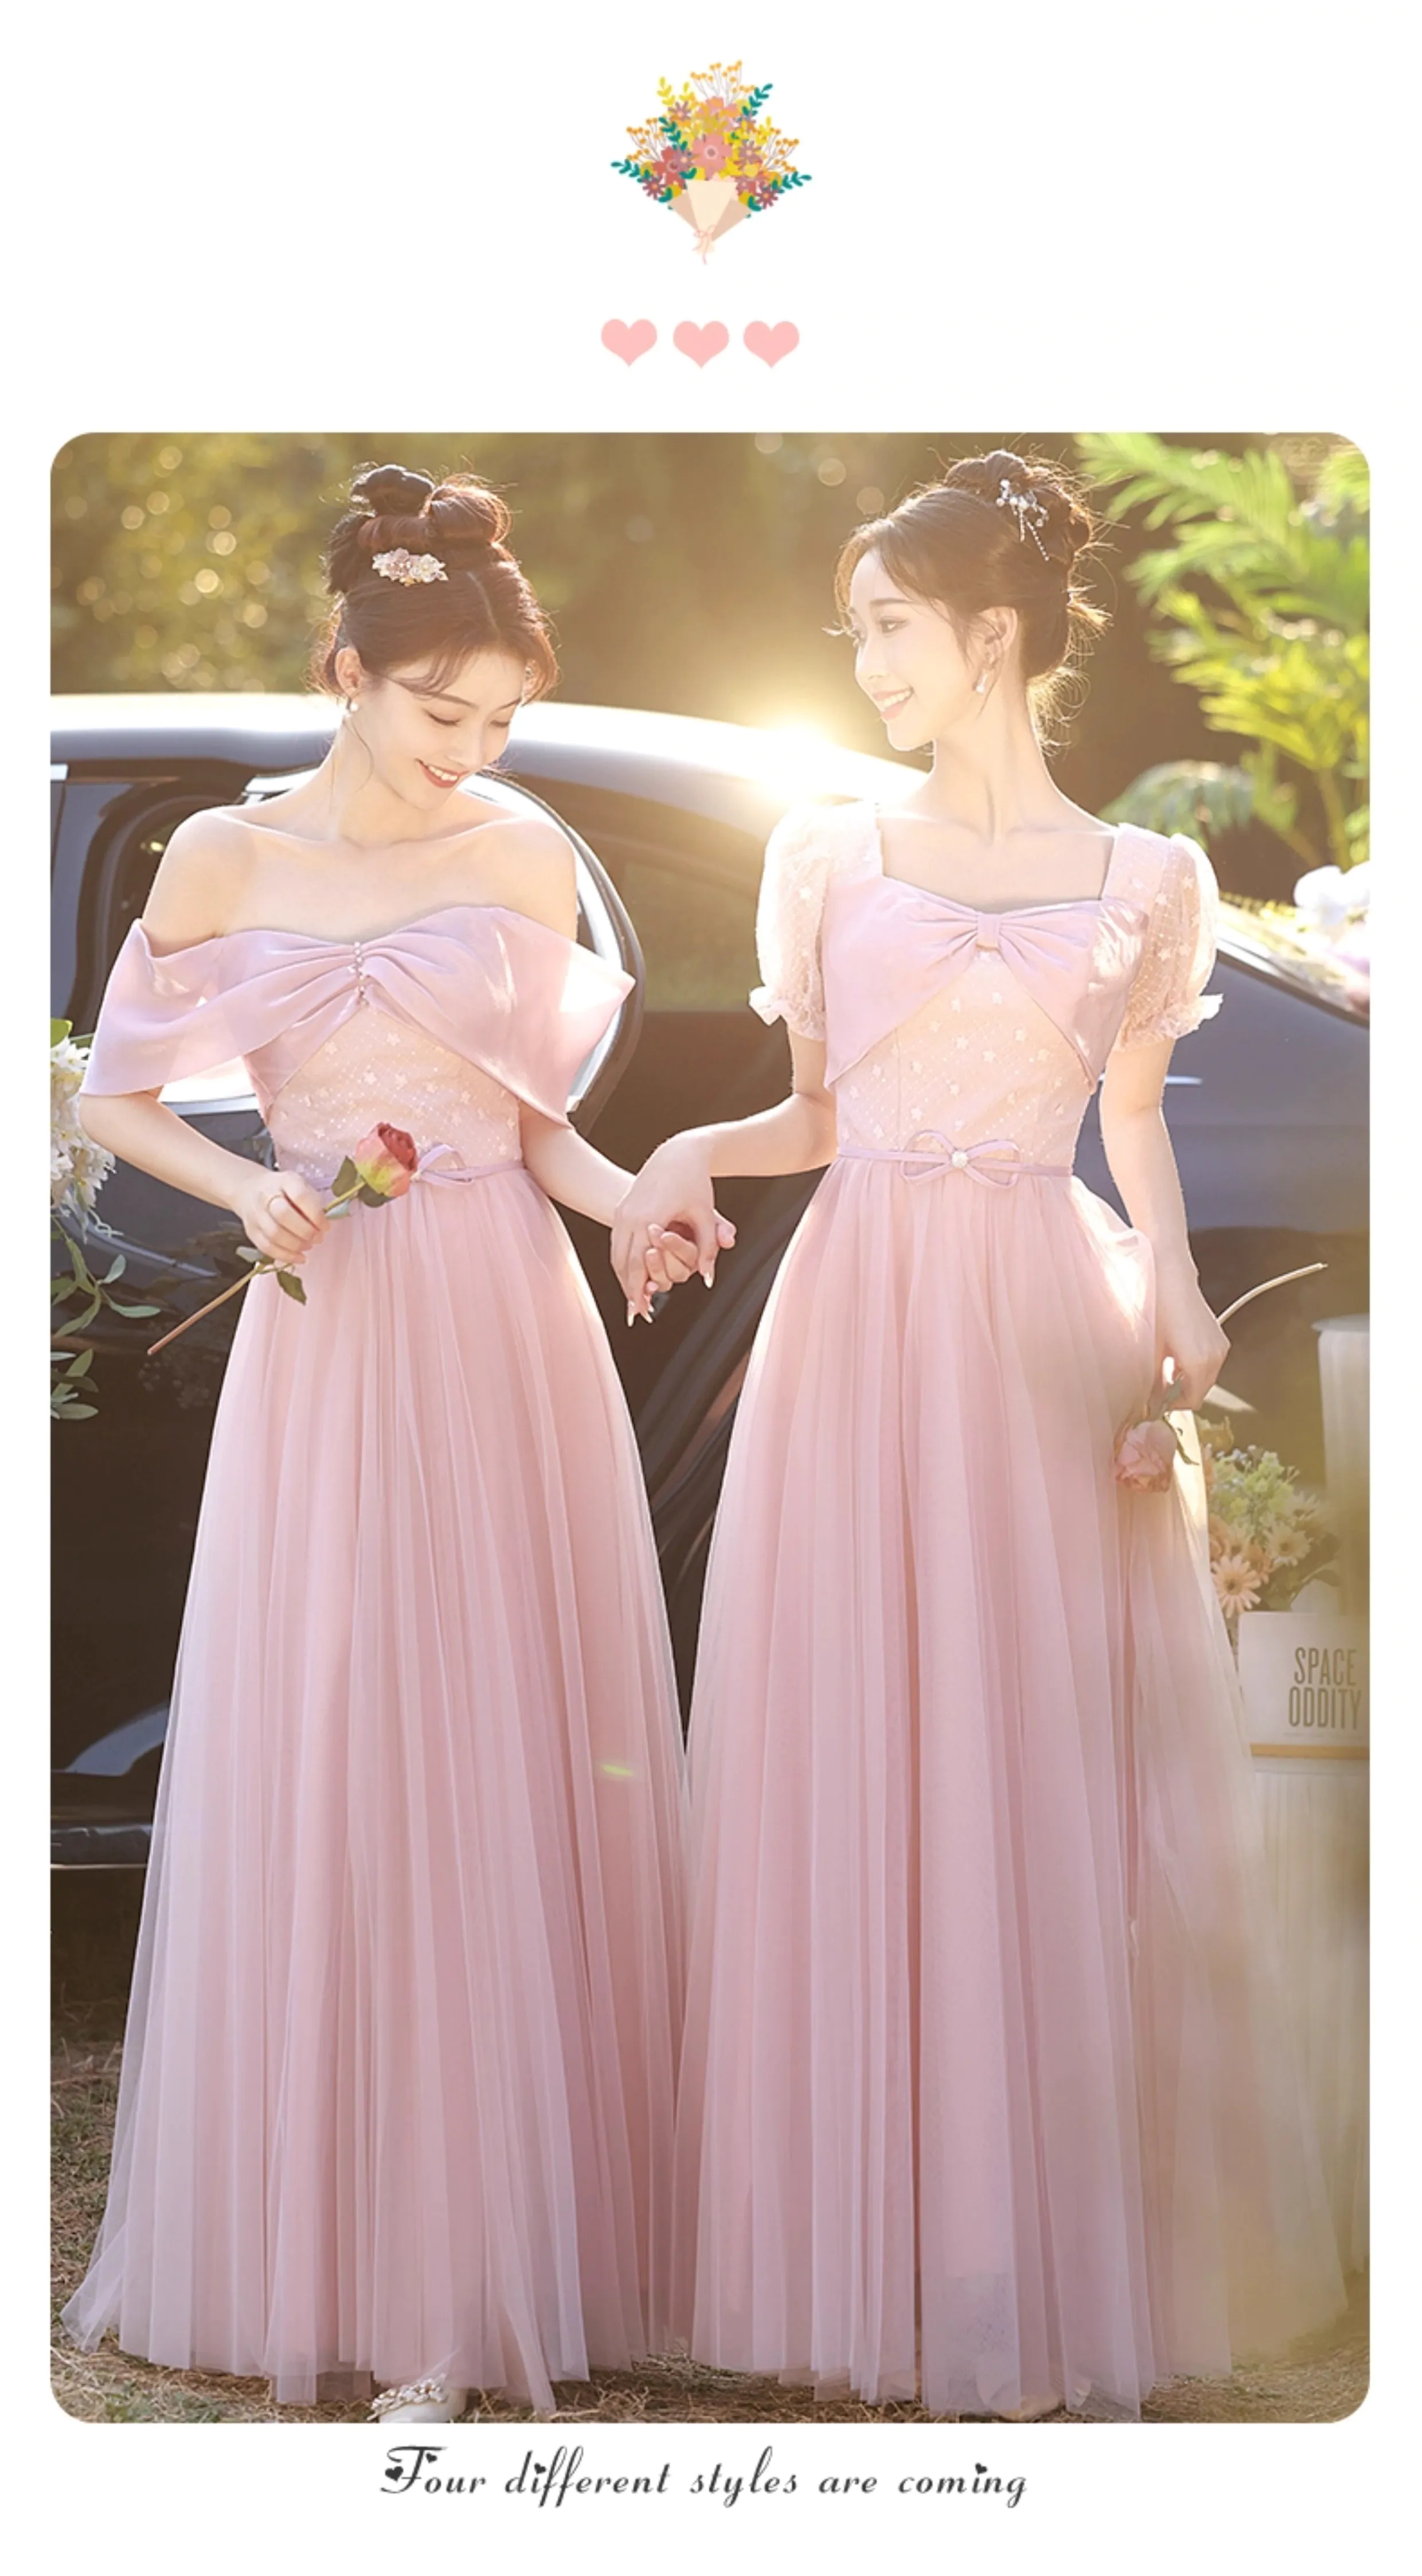 Sweet-Off-the-Shoulder-Pink-Birthday-Party-Bridesmaid-Dress-Evening-Gown17